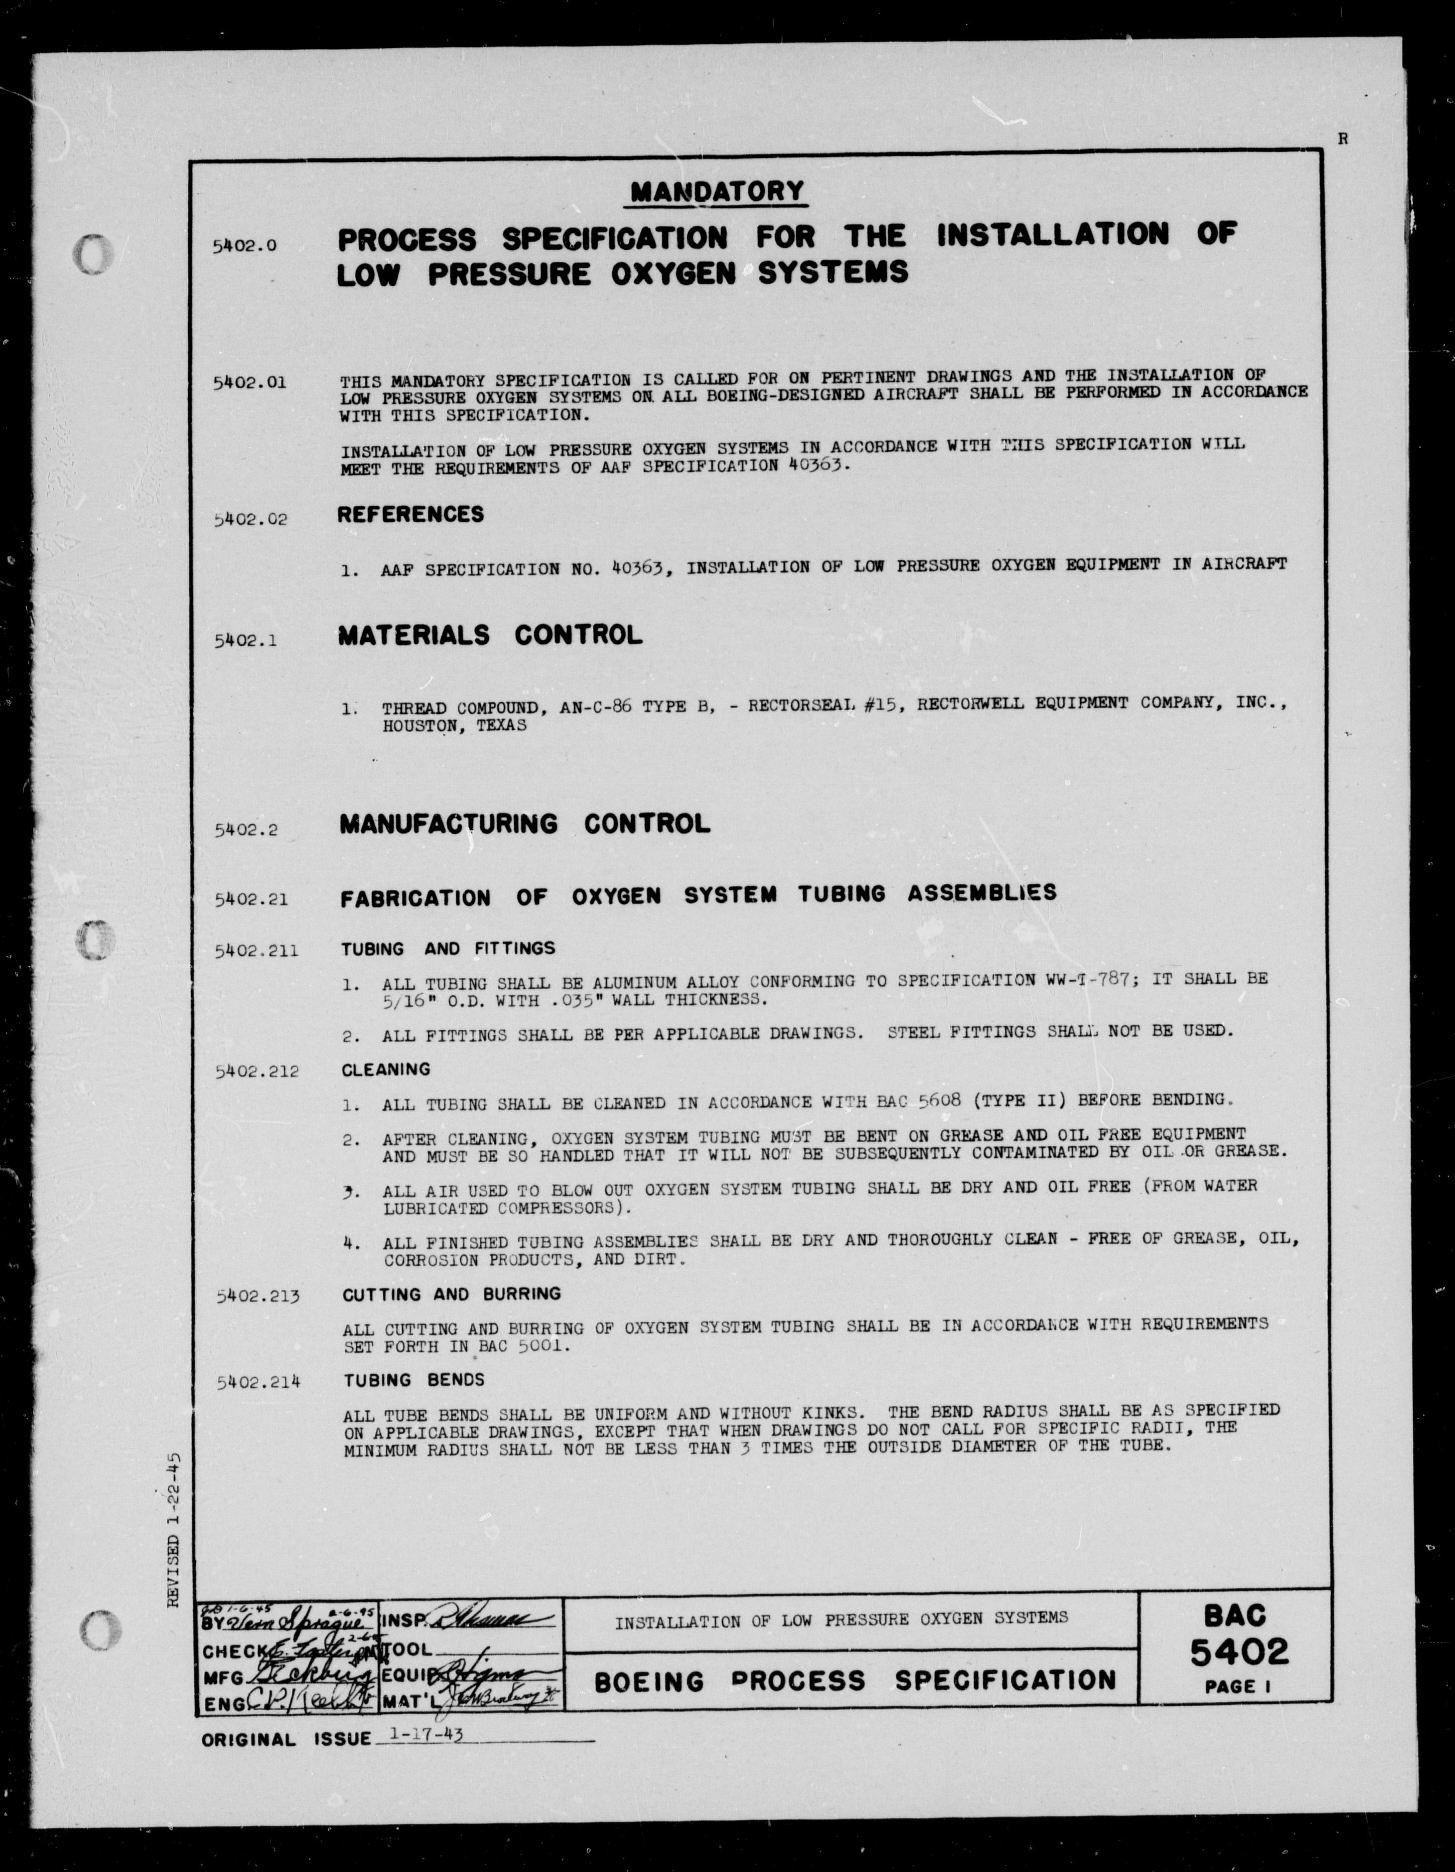 Sample page 1 from AirCorps Library document: Installation of Low Pressure Oxygen Systems